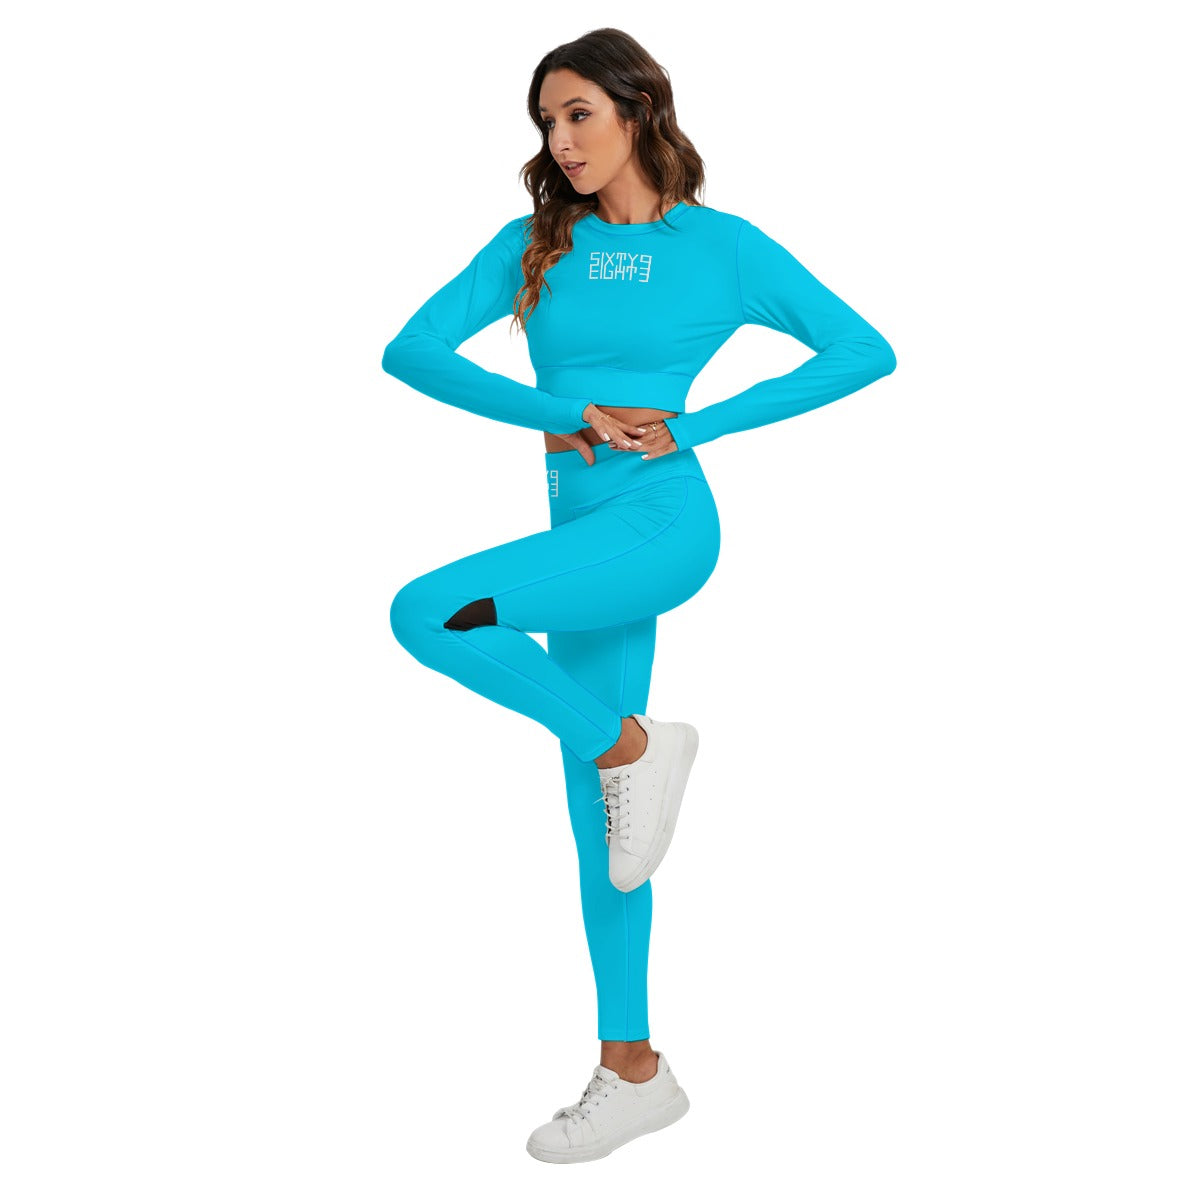 Sixty Eight 93 Logo White Aqua Blue Women's Sport Set With Backless Top And Leggings